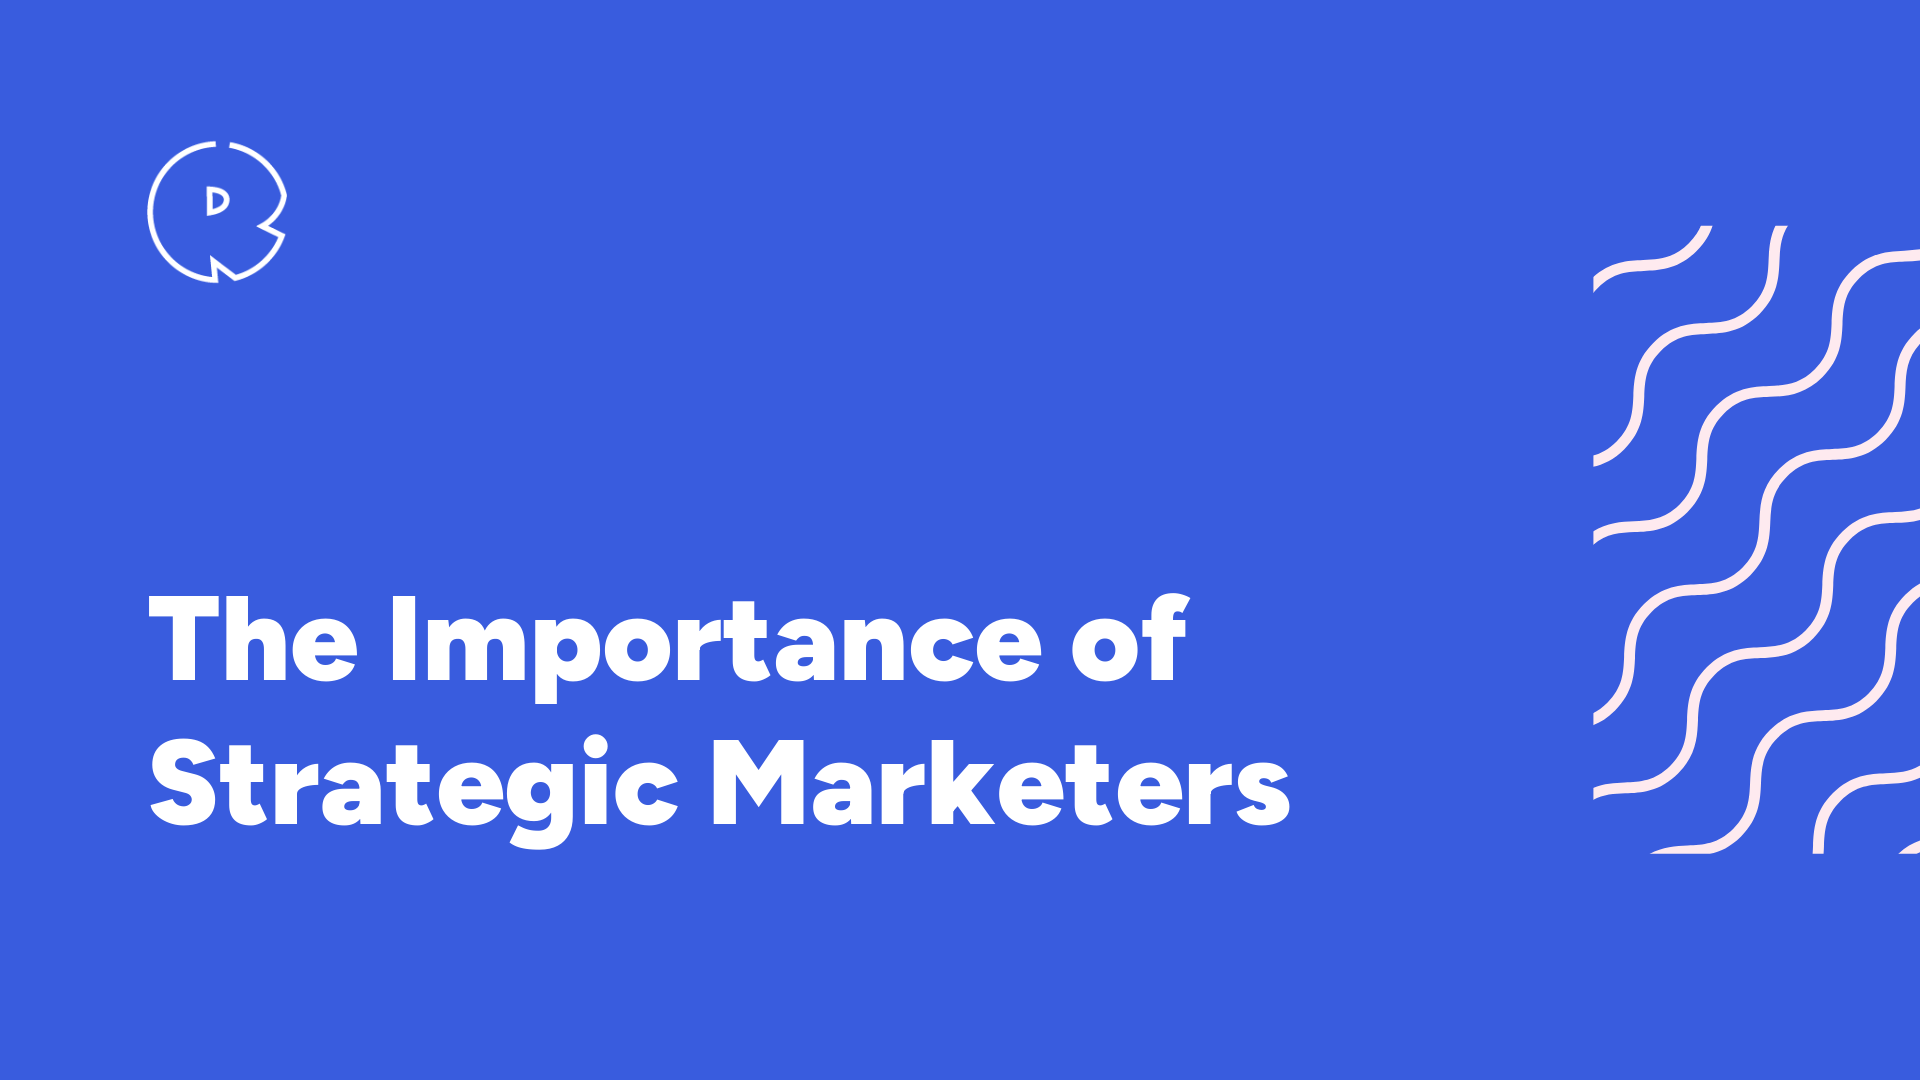 The Importance of Strategic Marketers